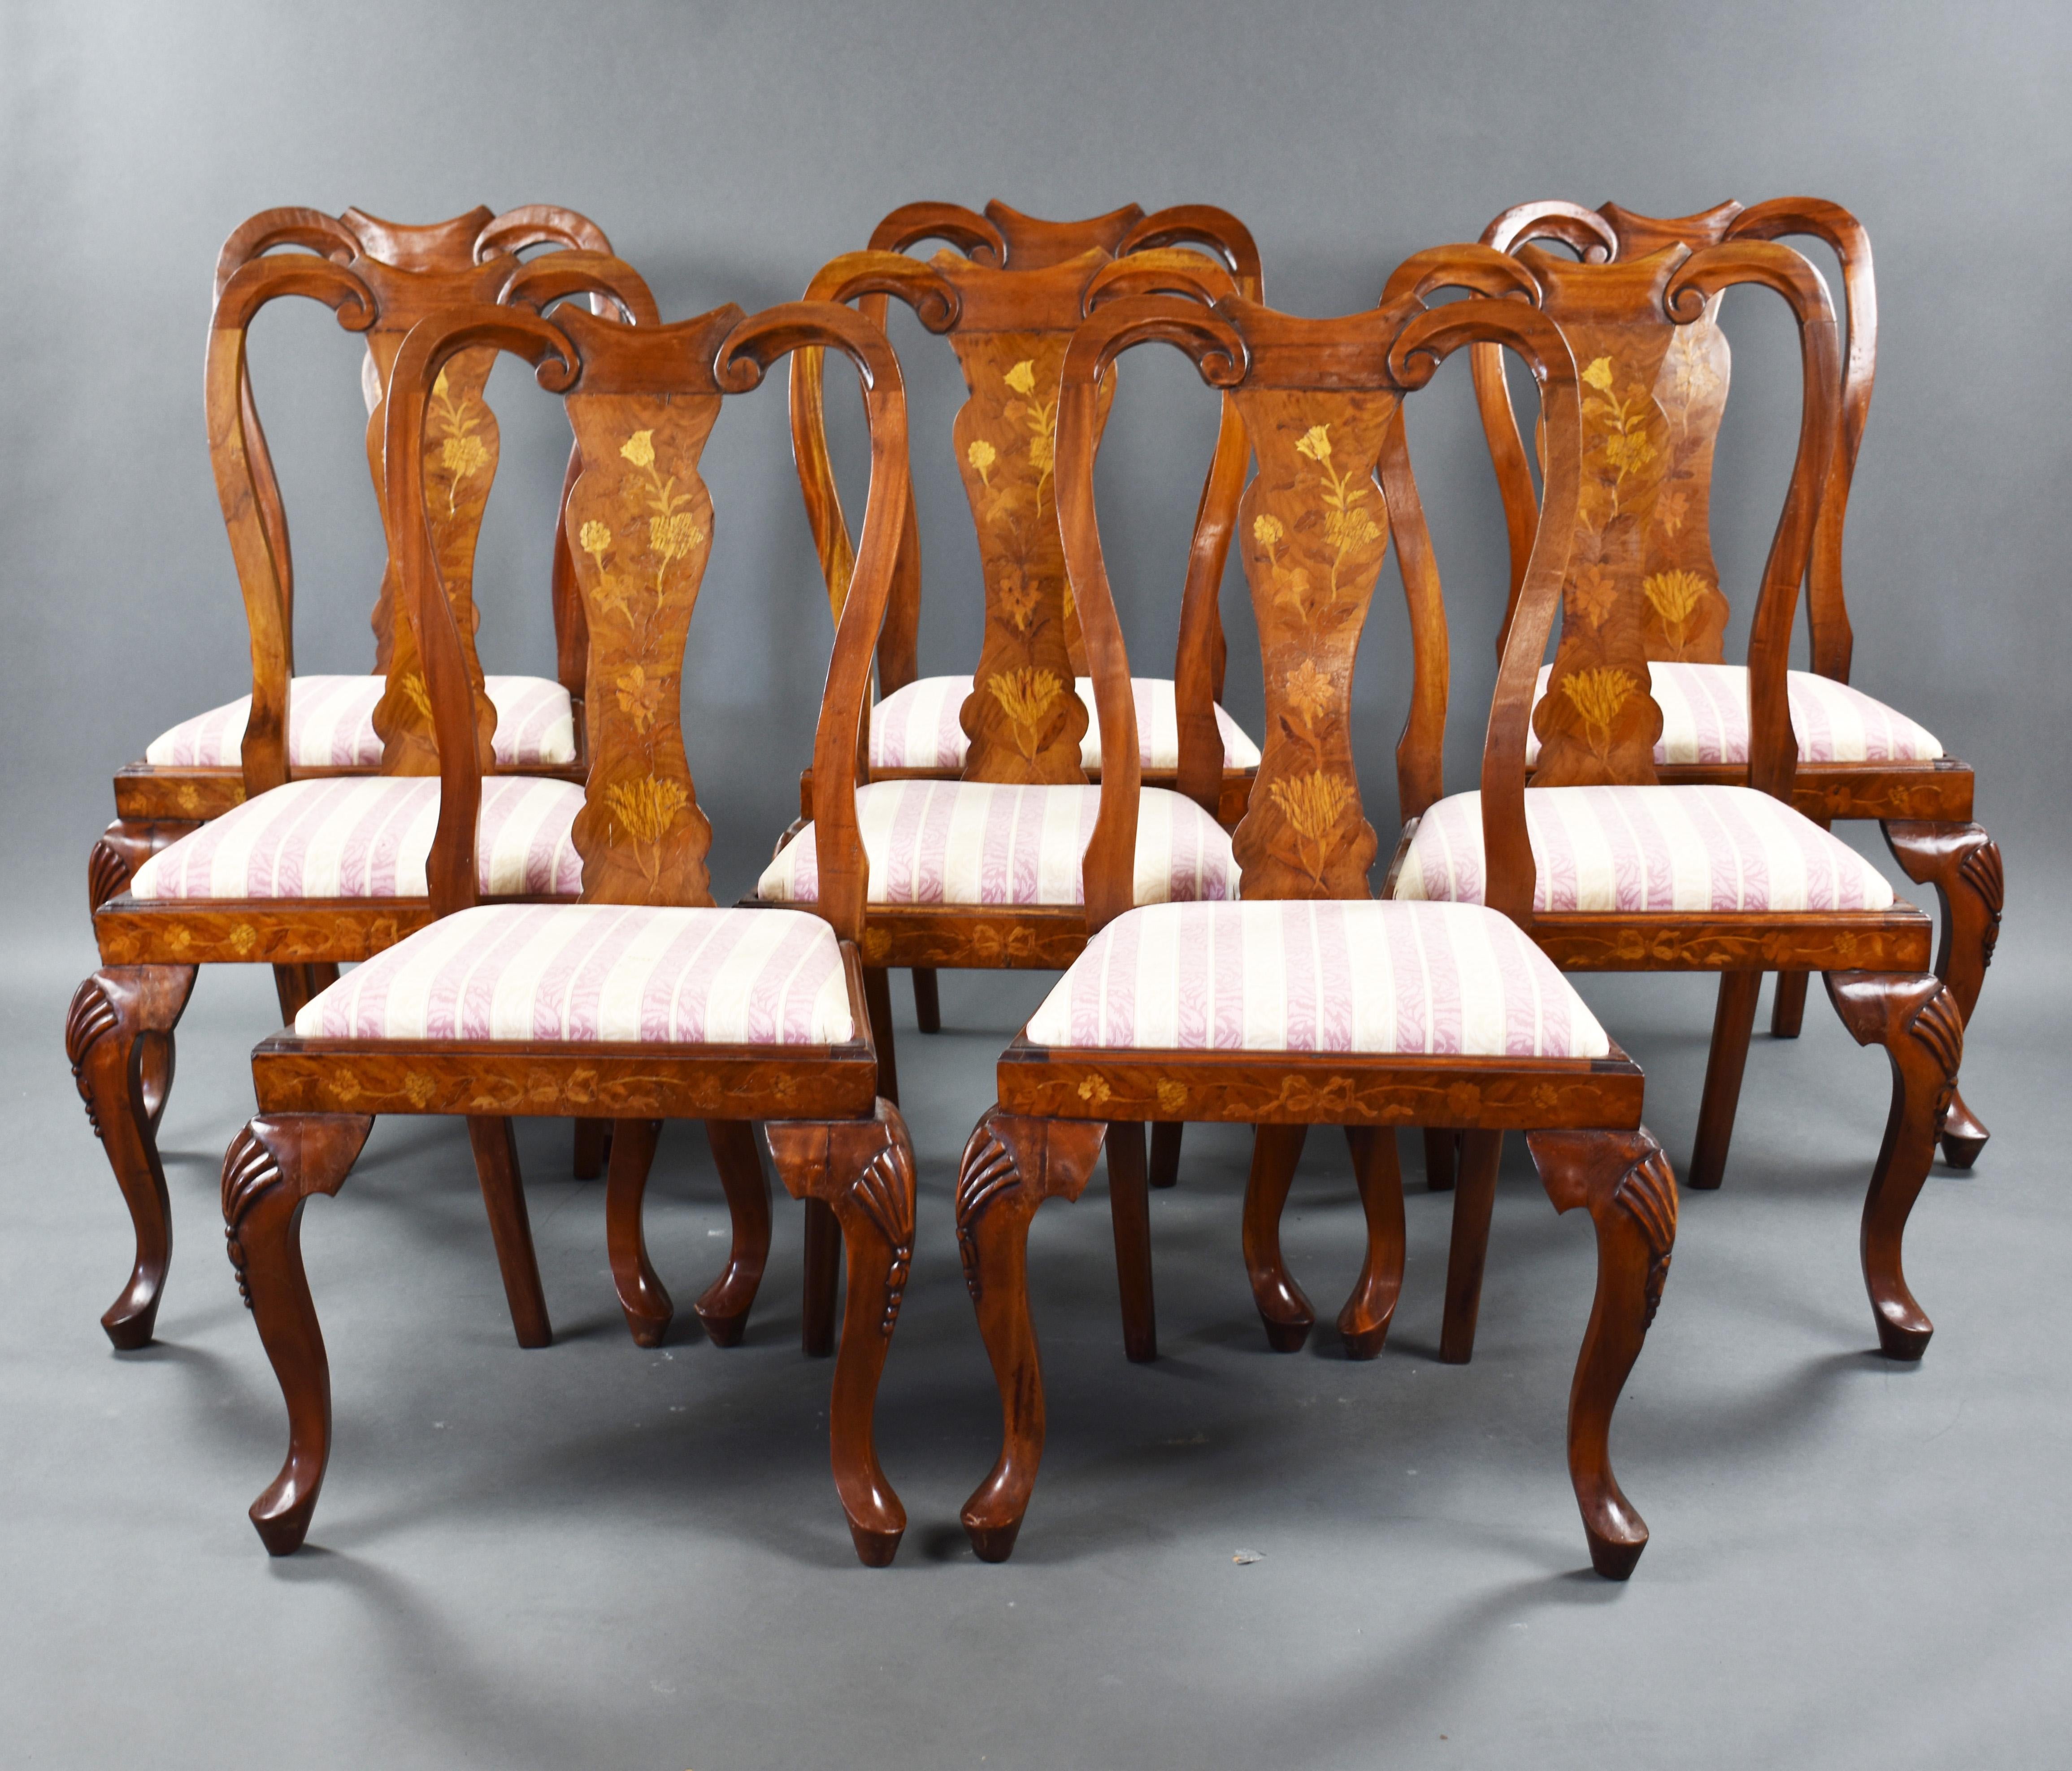 20th Century English Walnut & Marquetry Circular Dining Table & 8 Chairs For Sale 6